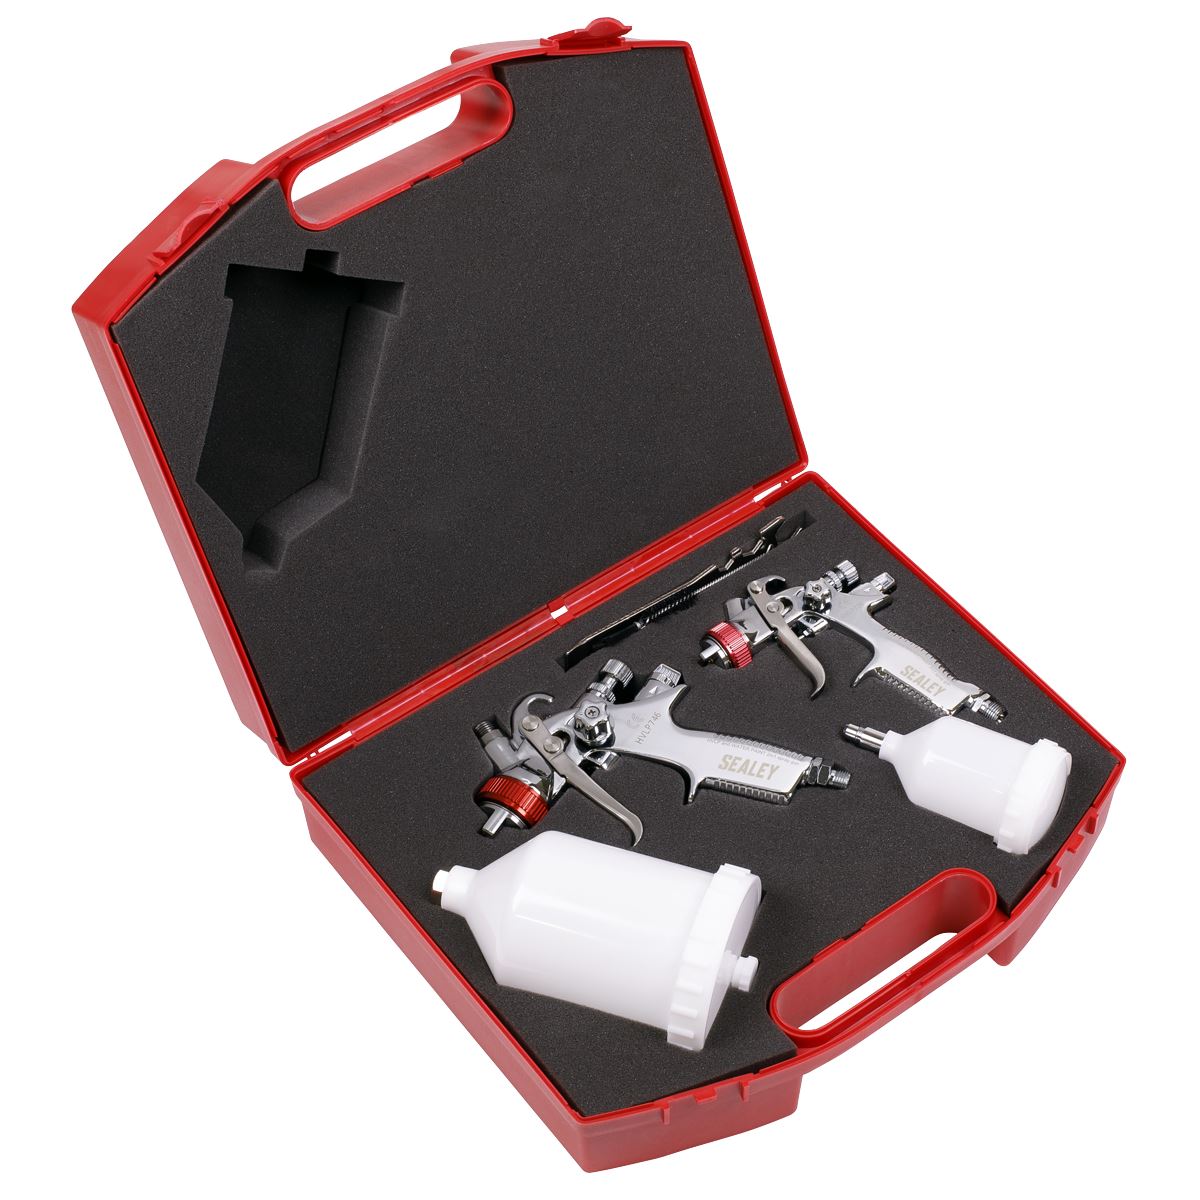 Sealey HVLP Gravity Feed Top Coat/Touch-Up Spray Gun Set